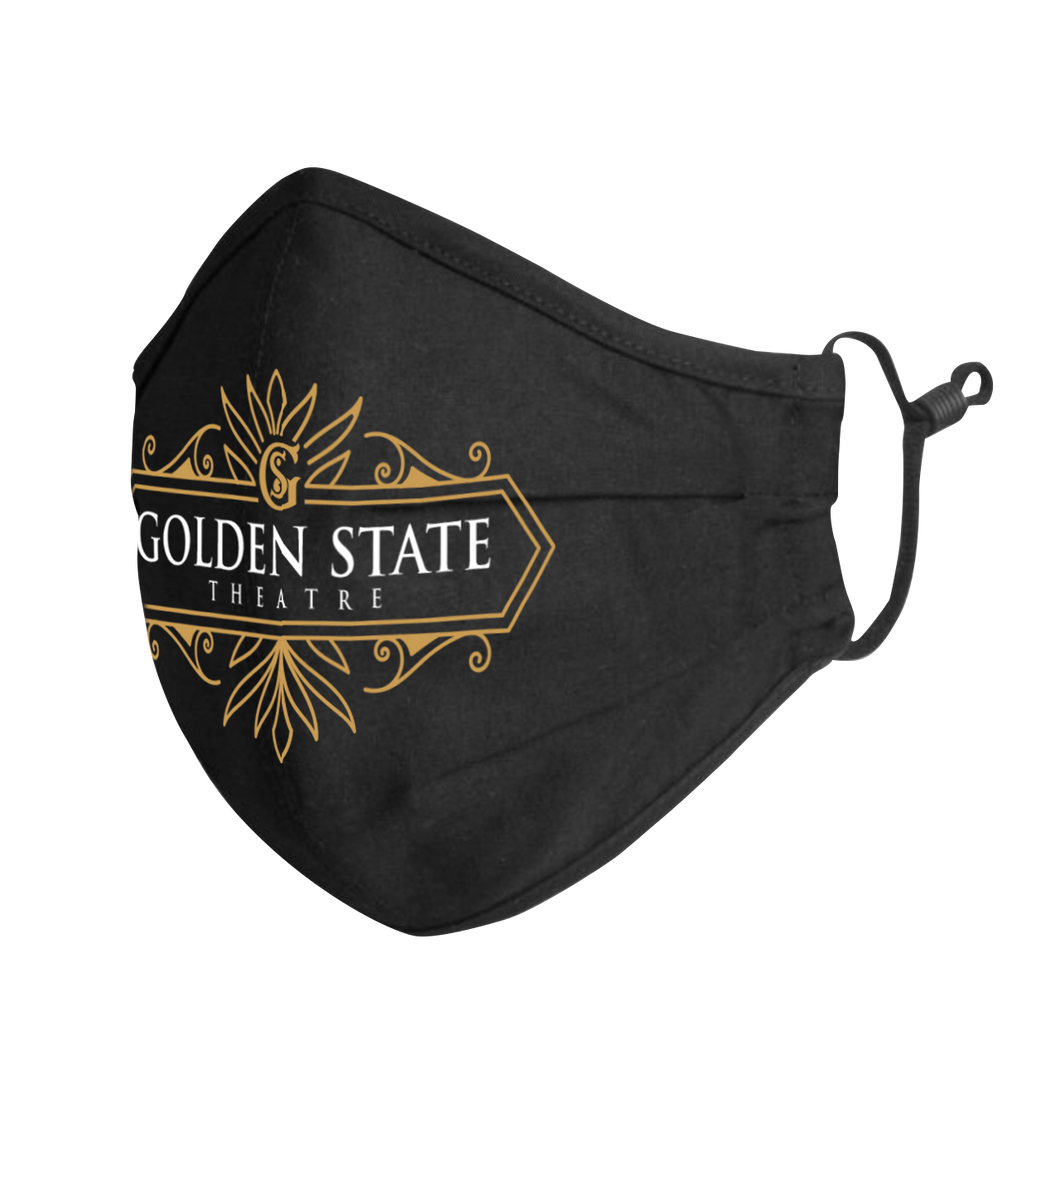 Golden State Theatre Mask